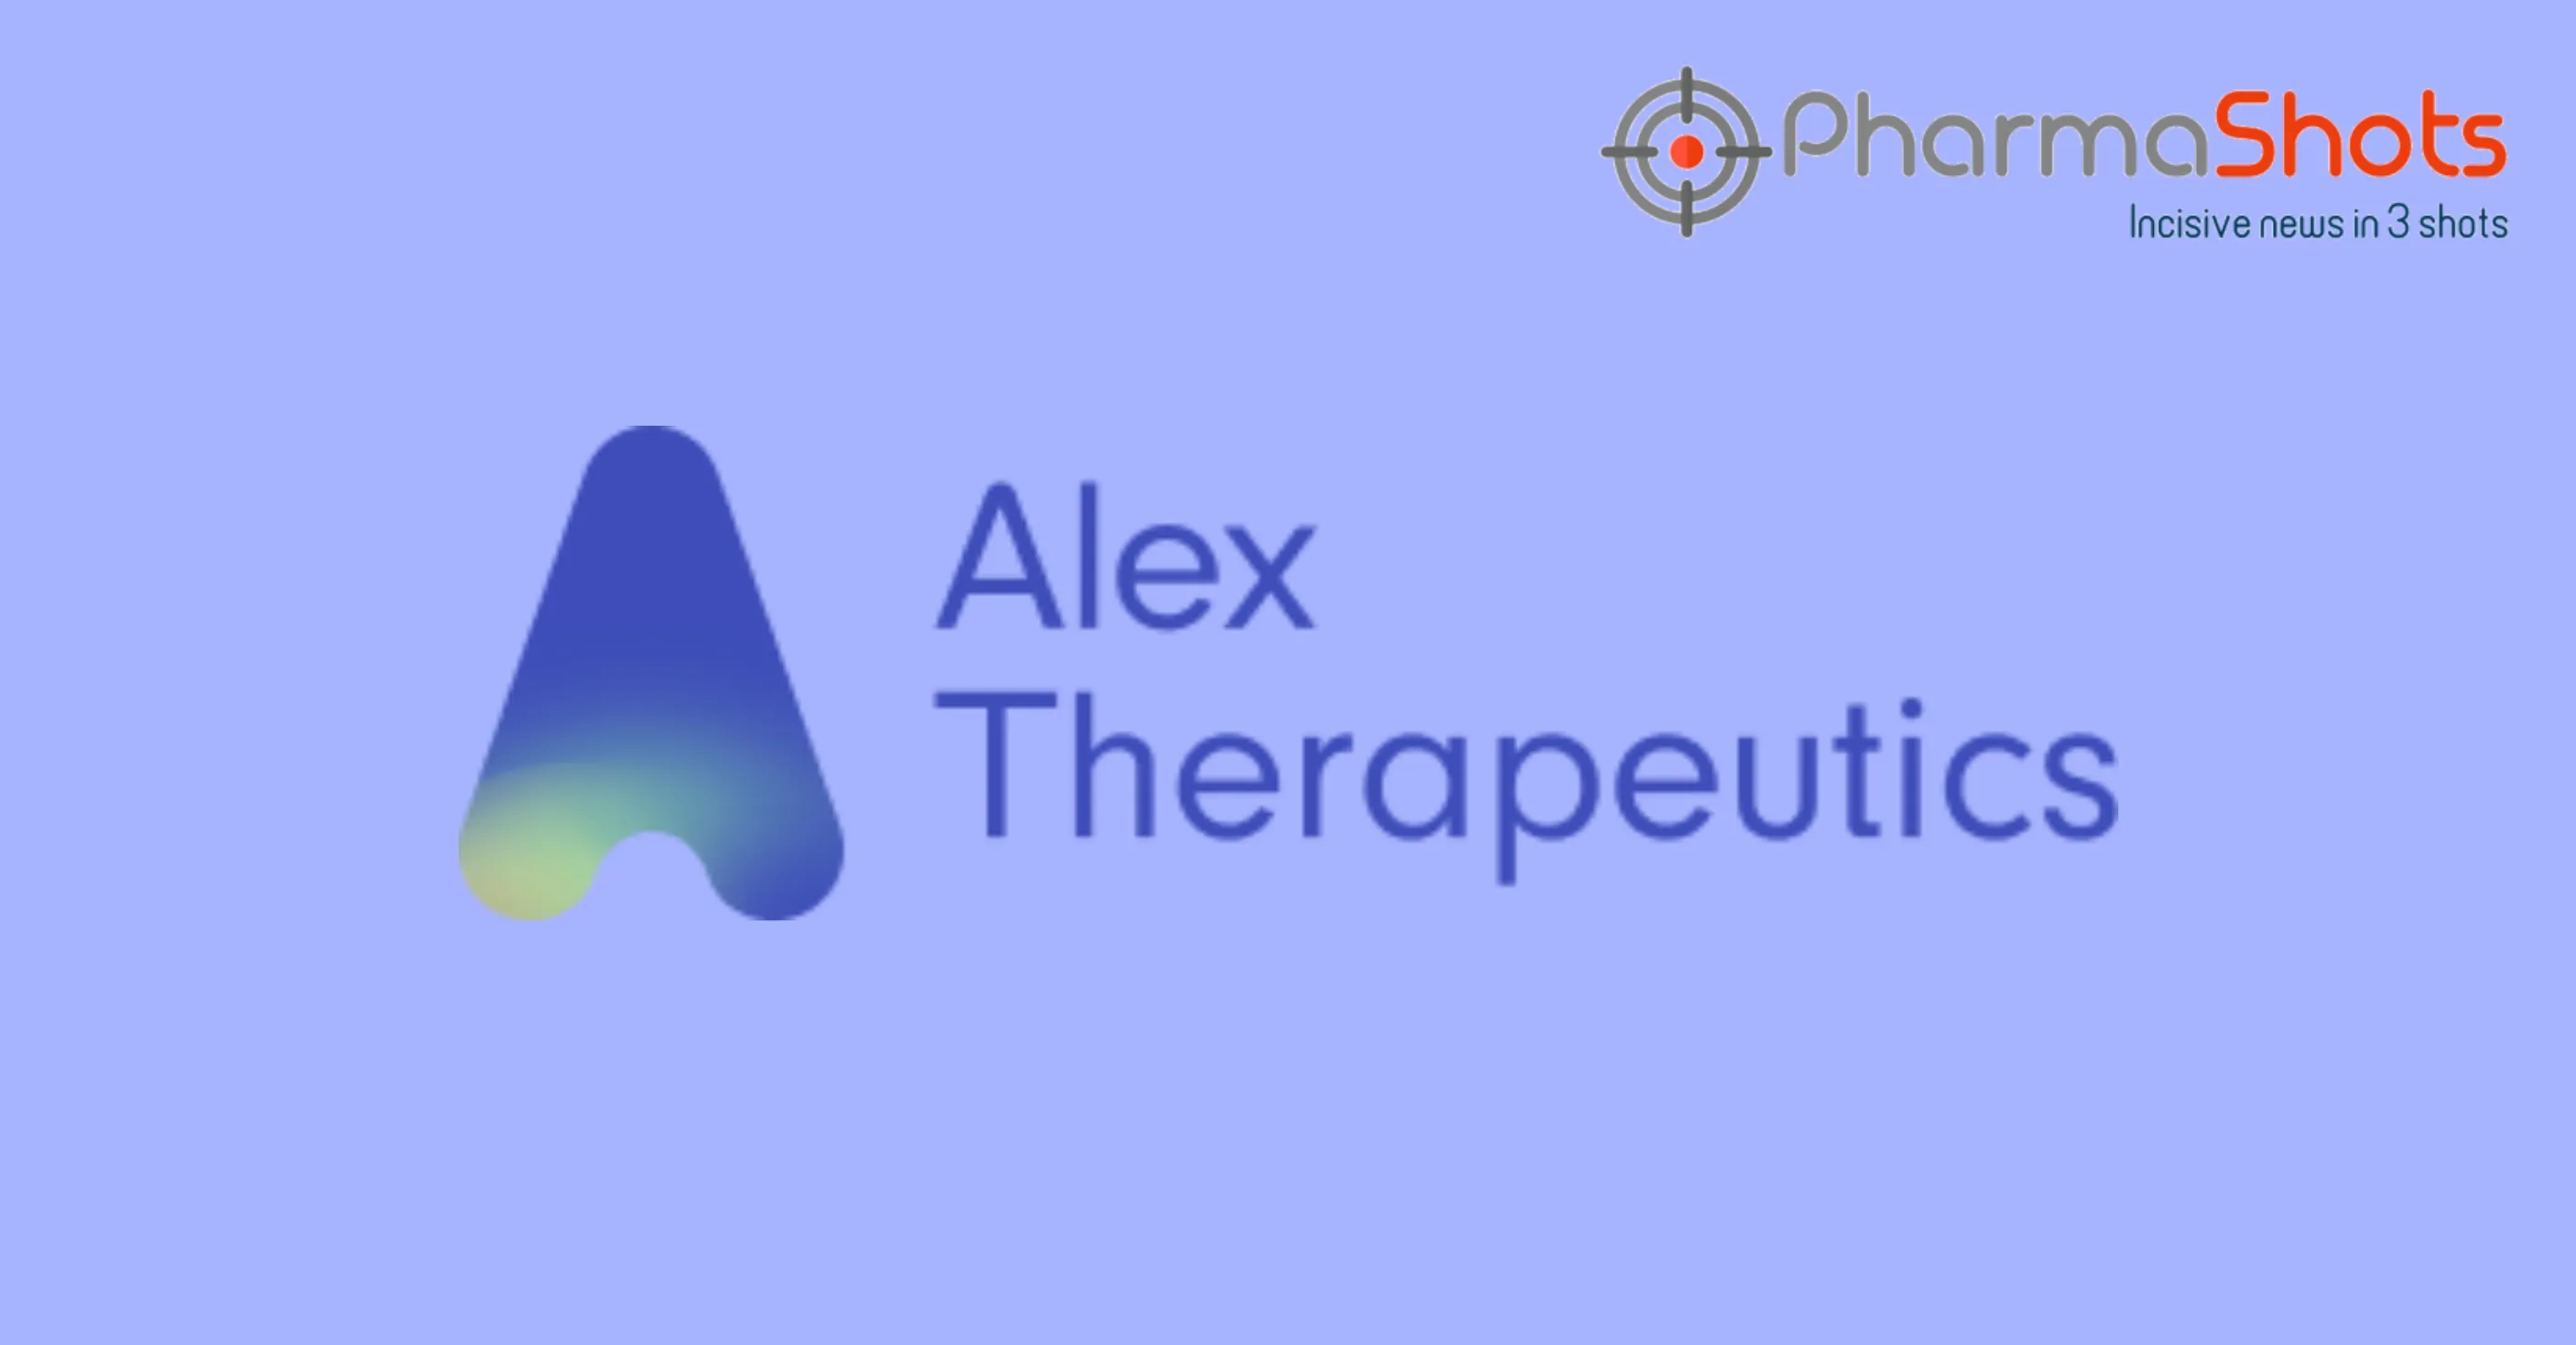 Alex Therapeutics Reports Results for Almee Under Clinical Evaluation for the Treatment of Anxiety Associated with Pulmonary Fibrosis (PF)